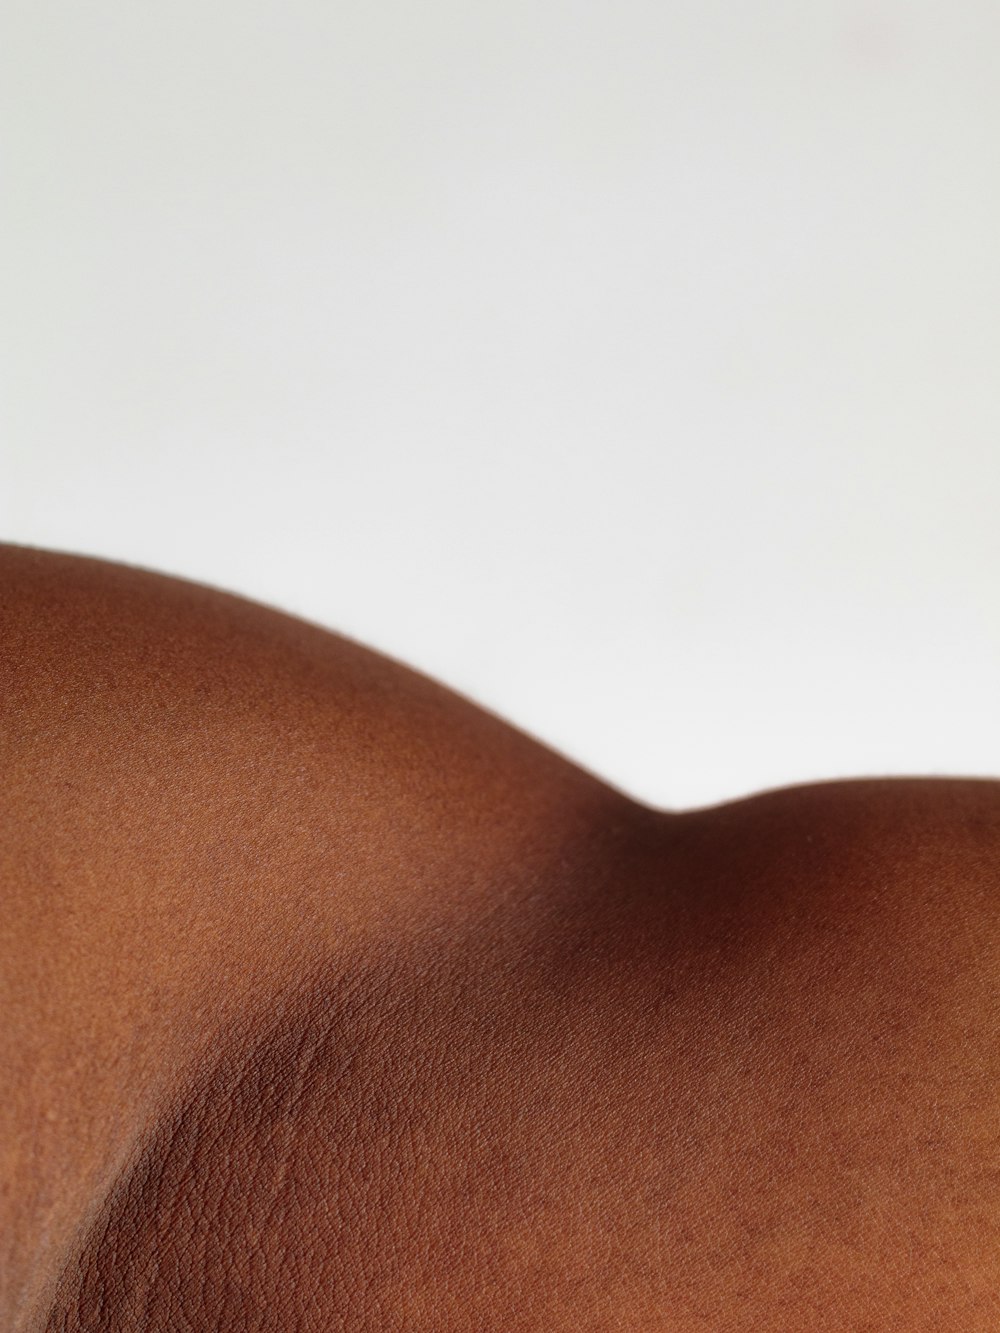 a close up of a person's back with no shirt on